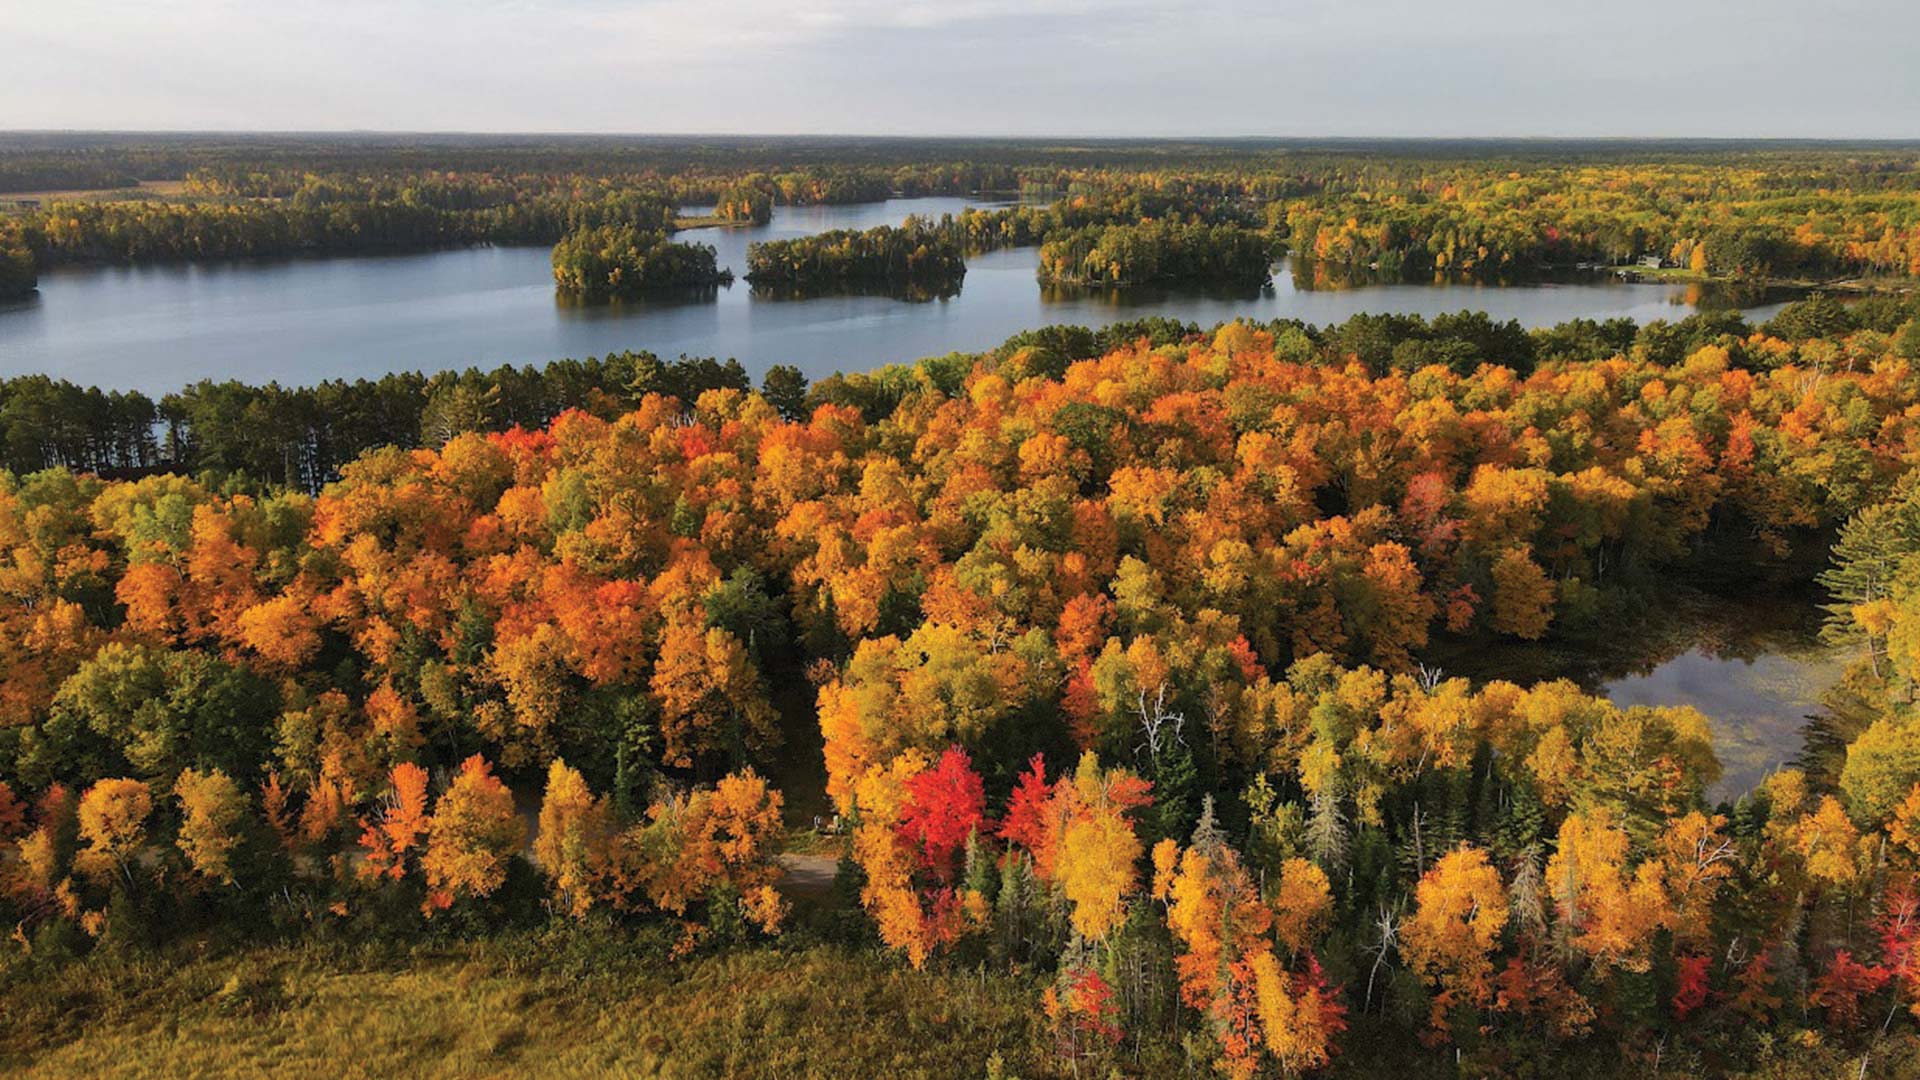 Overhead view of Grassy Lake, filled with fall color